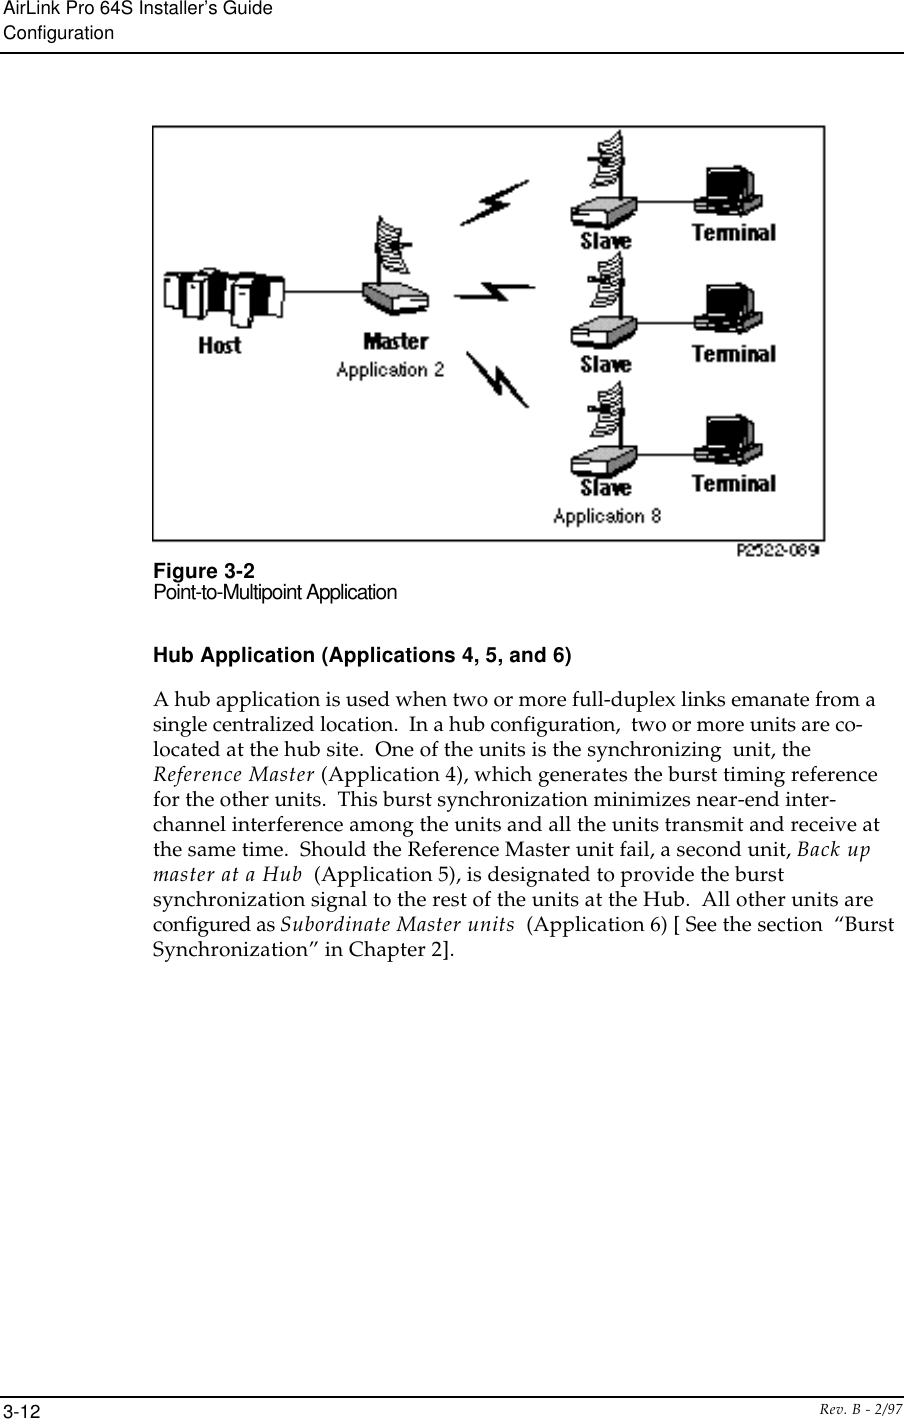 AirLink Pro 64S Installer’s GuideConfigurationRev. B - 2/973-12Figure 3-2Point-to-Multipoint ApplicationHub Application (Applications 4, 5, and 6)A hub application is used when two or more full-duplex links emanate from asingle centralized location.  In a hub configuration,  two or more units are co-located at the hub site.  One of the units is the synchronizing  unit, theReference Master (Application 4), which generates the burst timing referencefor the other units.  This burst synchronization minimizes near-end inter-channel interference among the units and all the units transmit and receive atthe same time.  Should the Reference Master unit fail, a second unit, Back upmaster at a Hub  (Application 5), is designated to provide the burstsynchronization signal to the rest of the units at the Hub.  All other units areconfigured as Subordinate Master units  (Application 6) [ See the section  “BurstSynchronization” in Chapter 2].